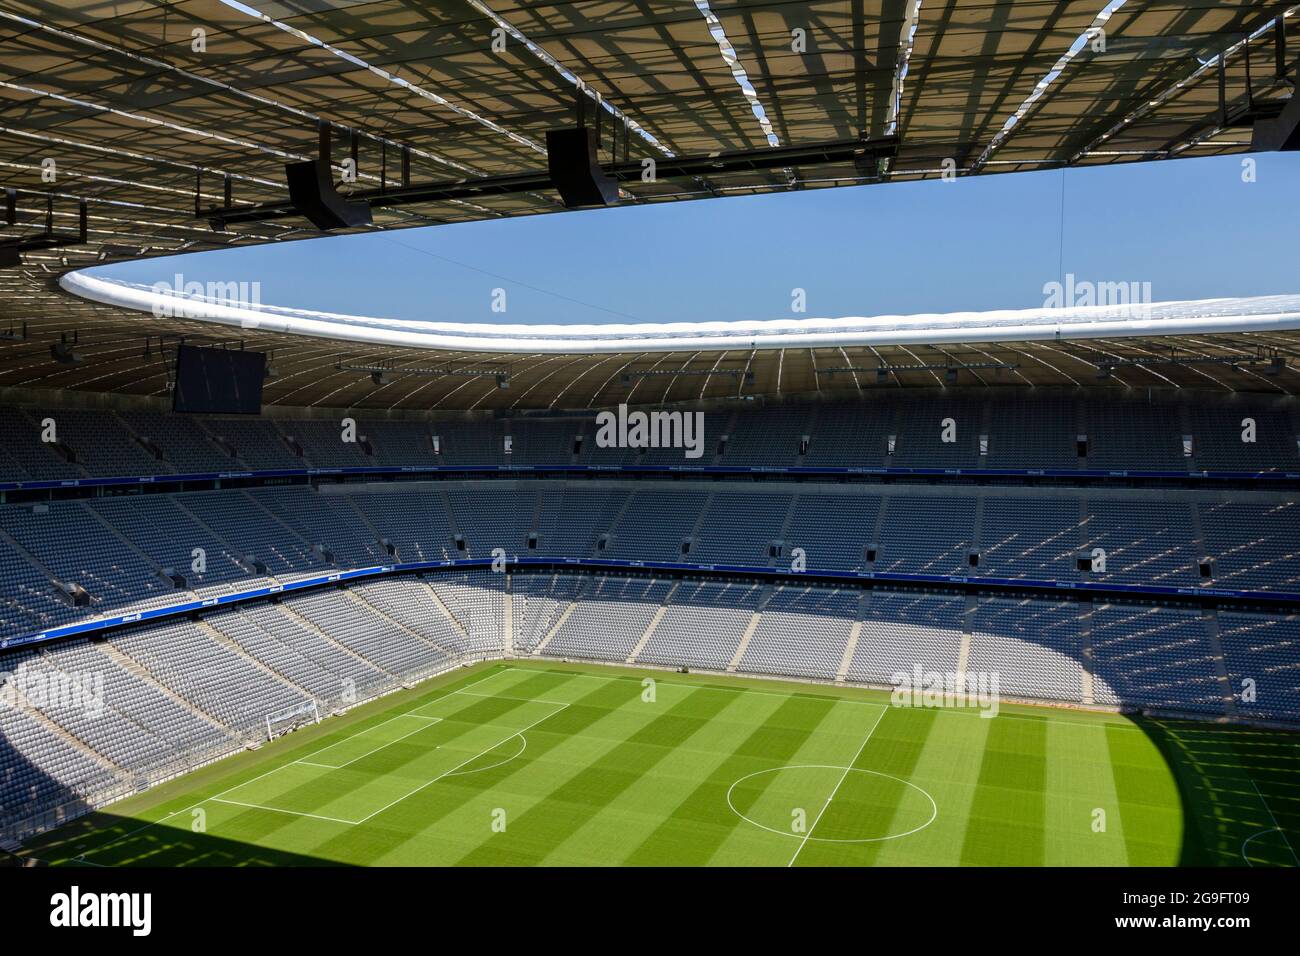 Munich, Germany - 08 26 2011: Interior of the empty Allianz Arena stadium  in Munich, Germany on a summer day Stock Photo - Alamy